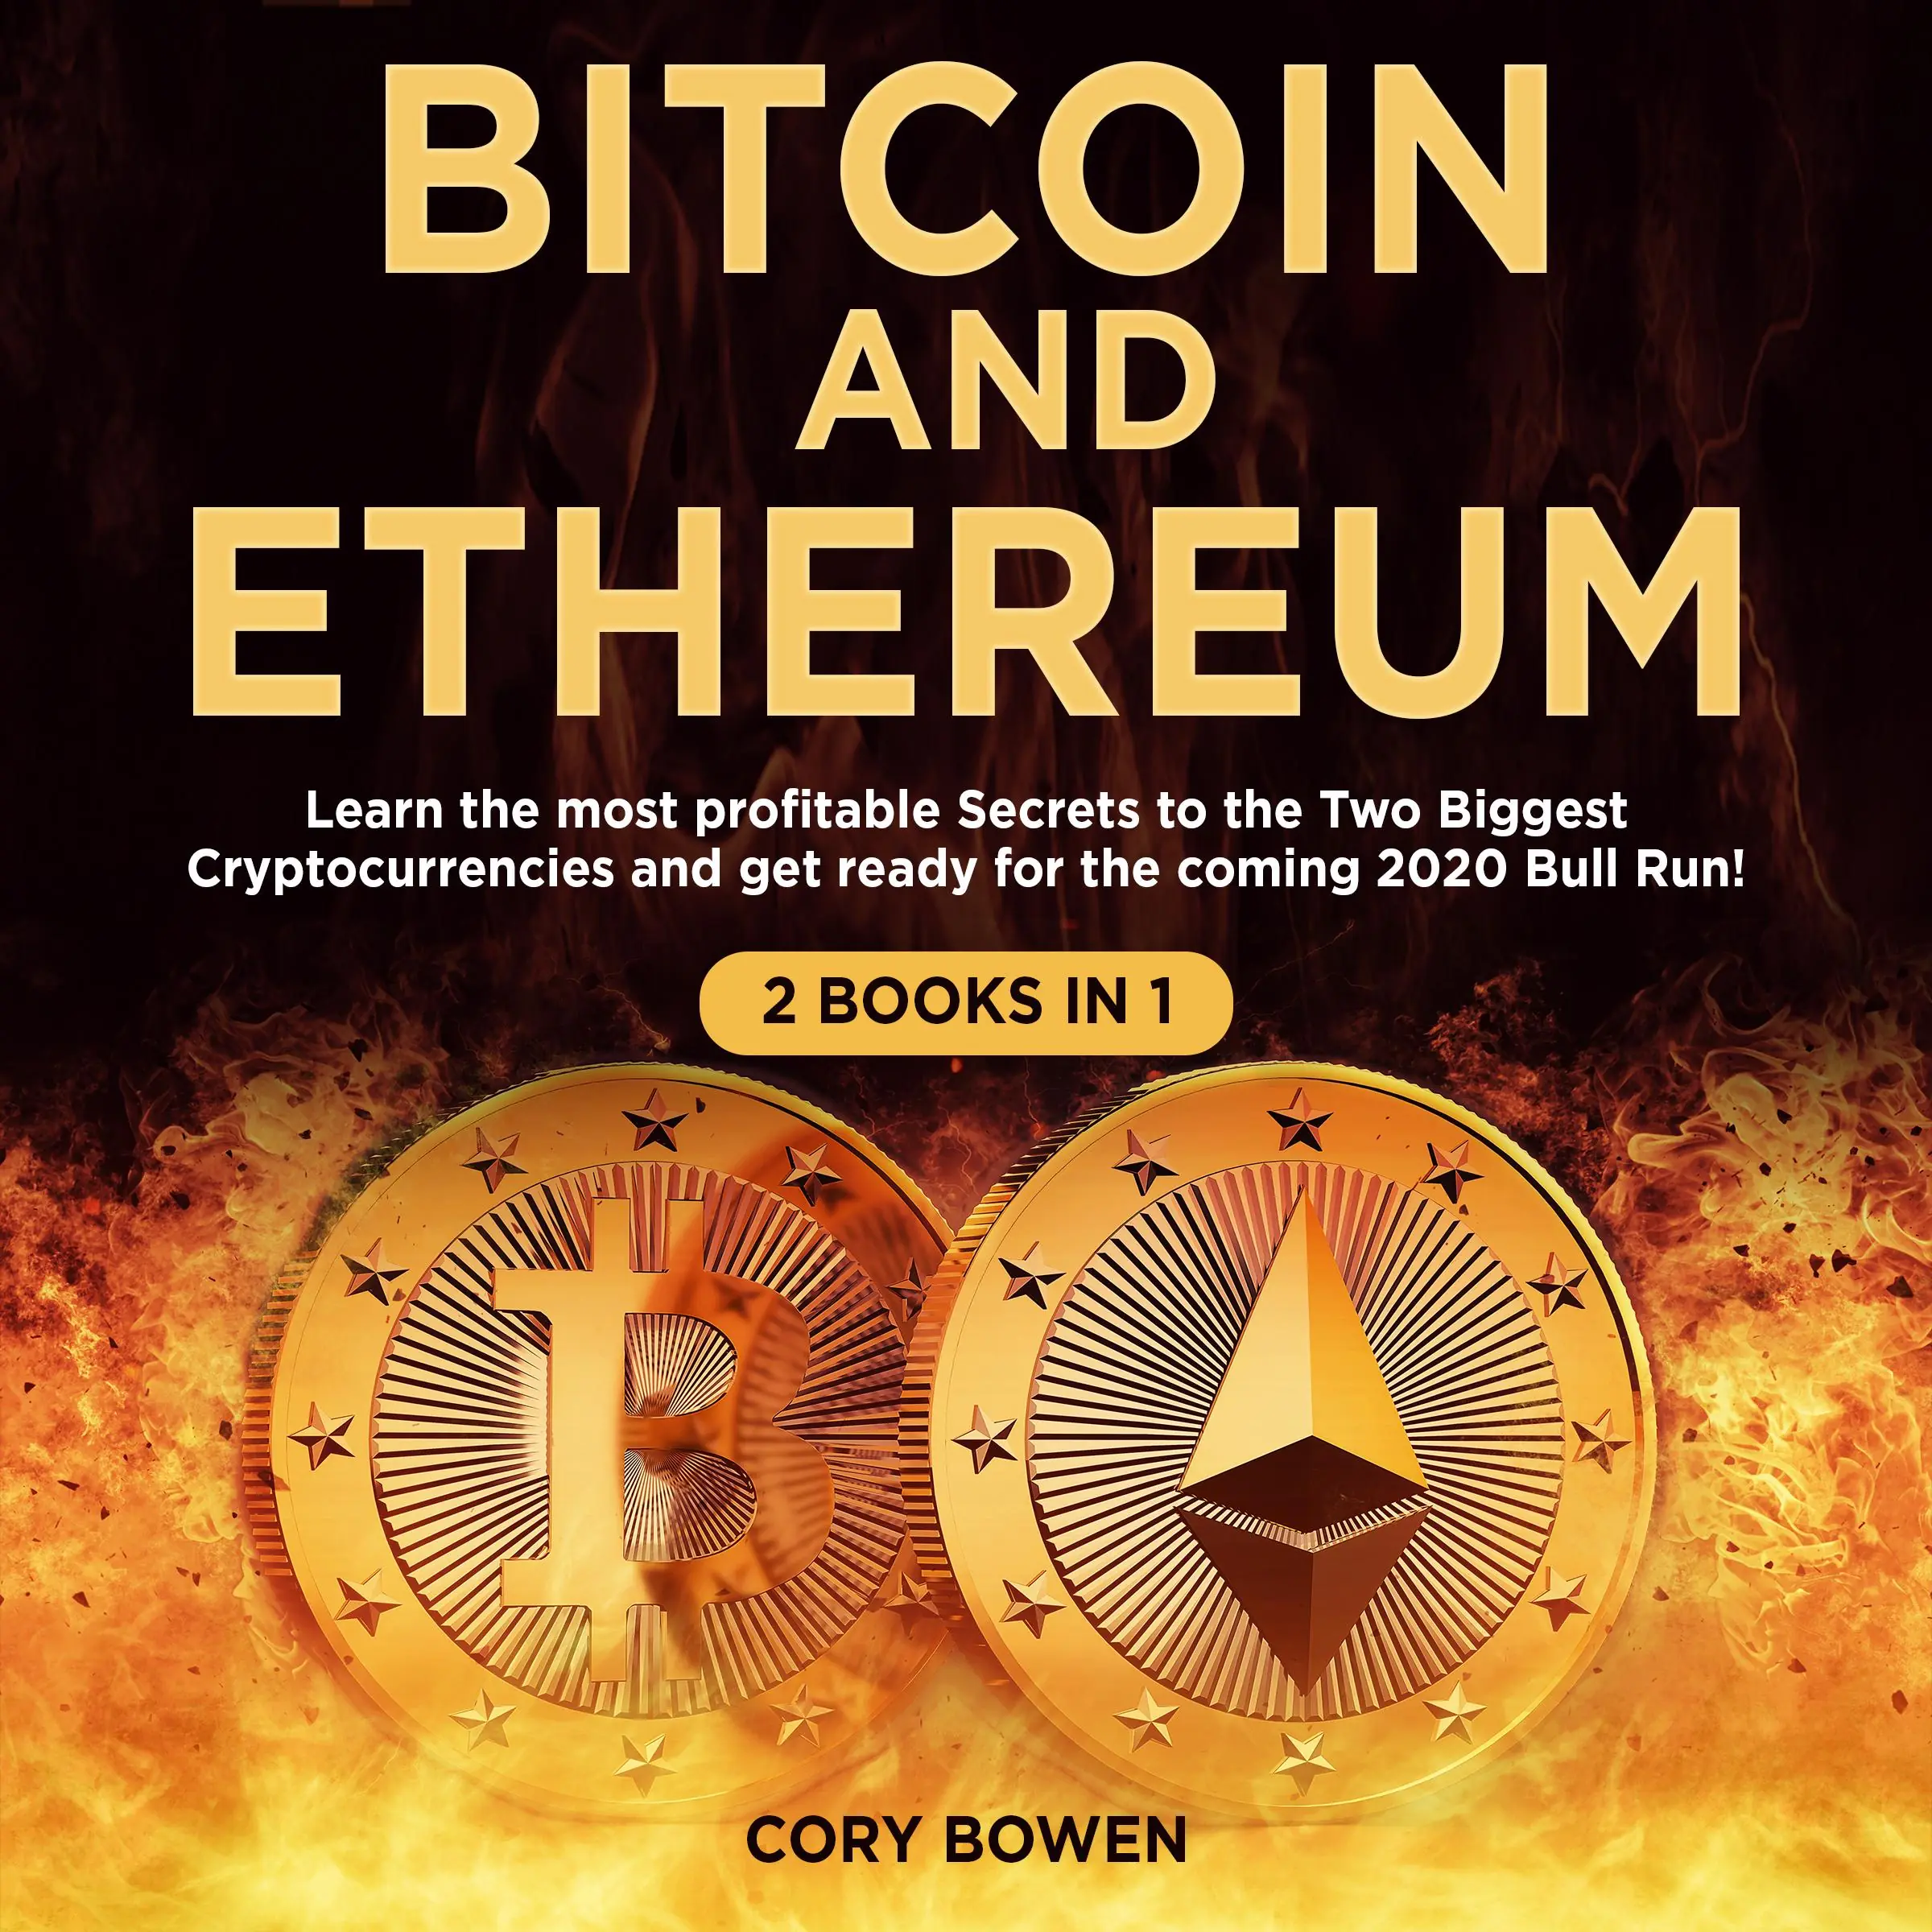 Bitcoin and Ethereum 2 Books in 1: Learn the most profitable Secrets to the Two biggest Cryptocurrencies and get ready for the 2020 Bull Run! by Cory Bowen Audiobook